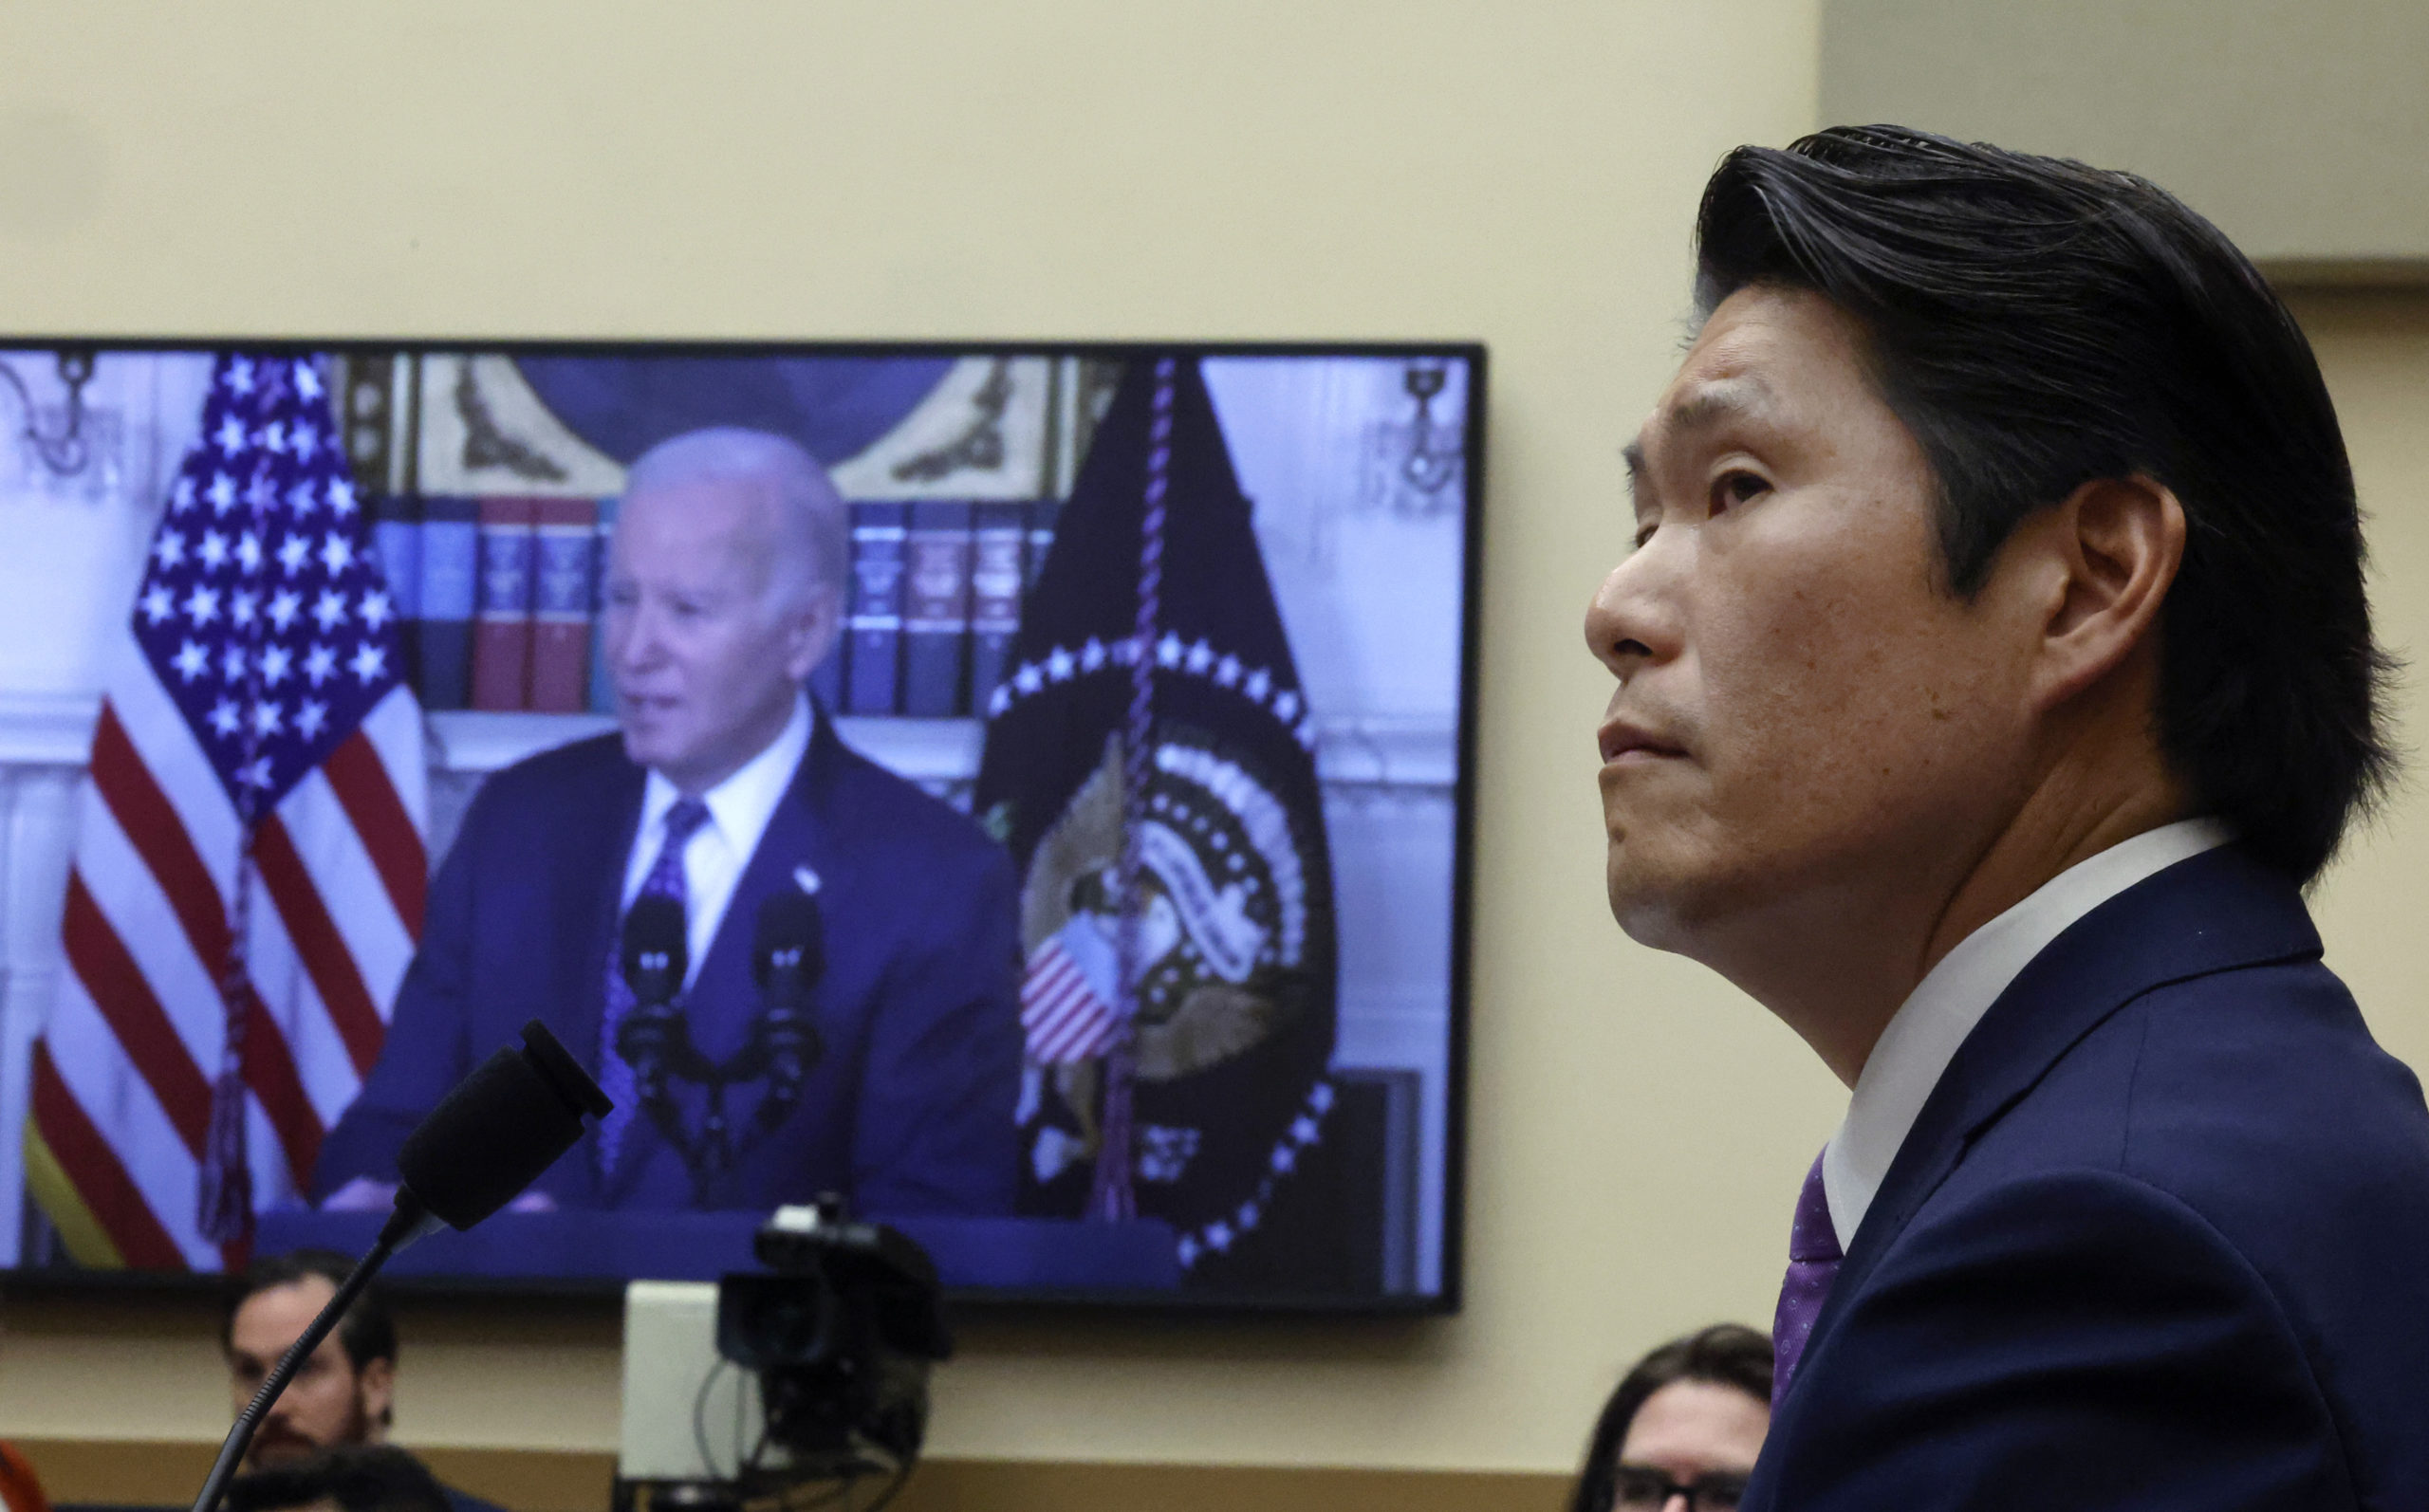  Former Special Counsel Robert K. Hur testifies alongside a video of President Joe Biden before the House Judiciary Committee on March 12, 2024 in Washington, DC. Hur investigated U.S. President Joe Biden’s mishandling of classified documents and published a final report with contentious conclusions about Biden’s memory. (Photo by Chip Somodevilla/Getty Images)